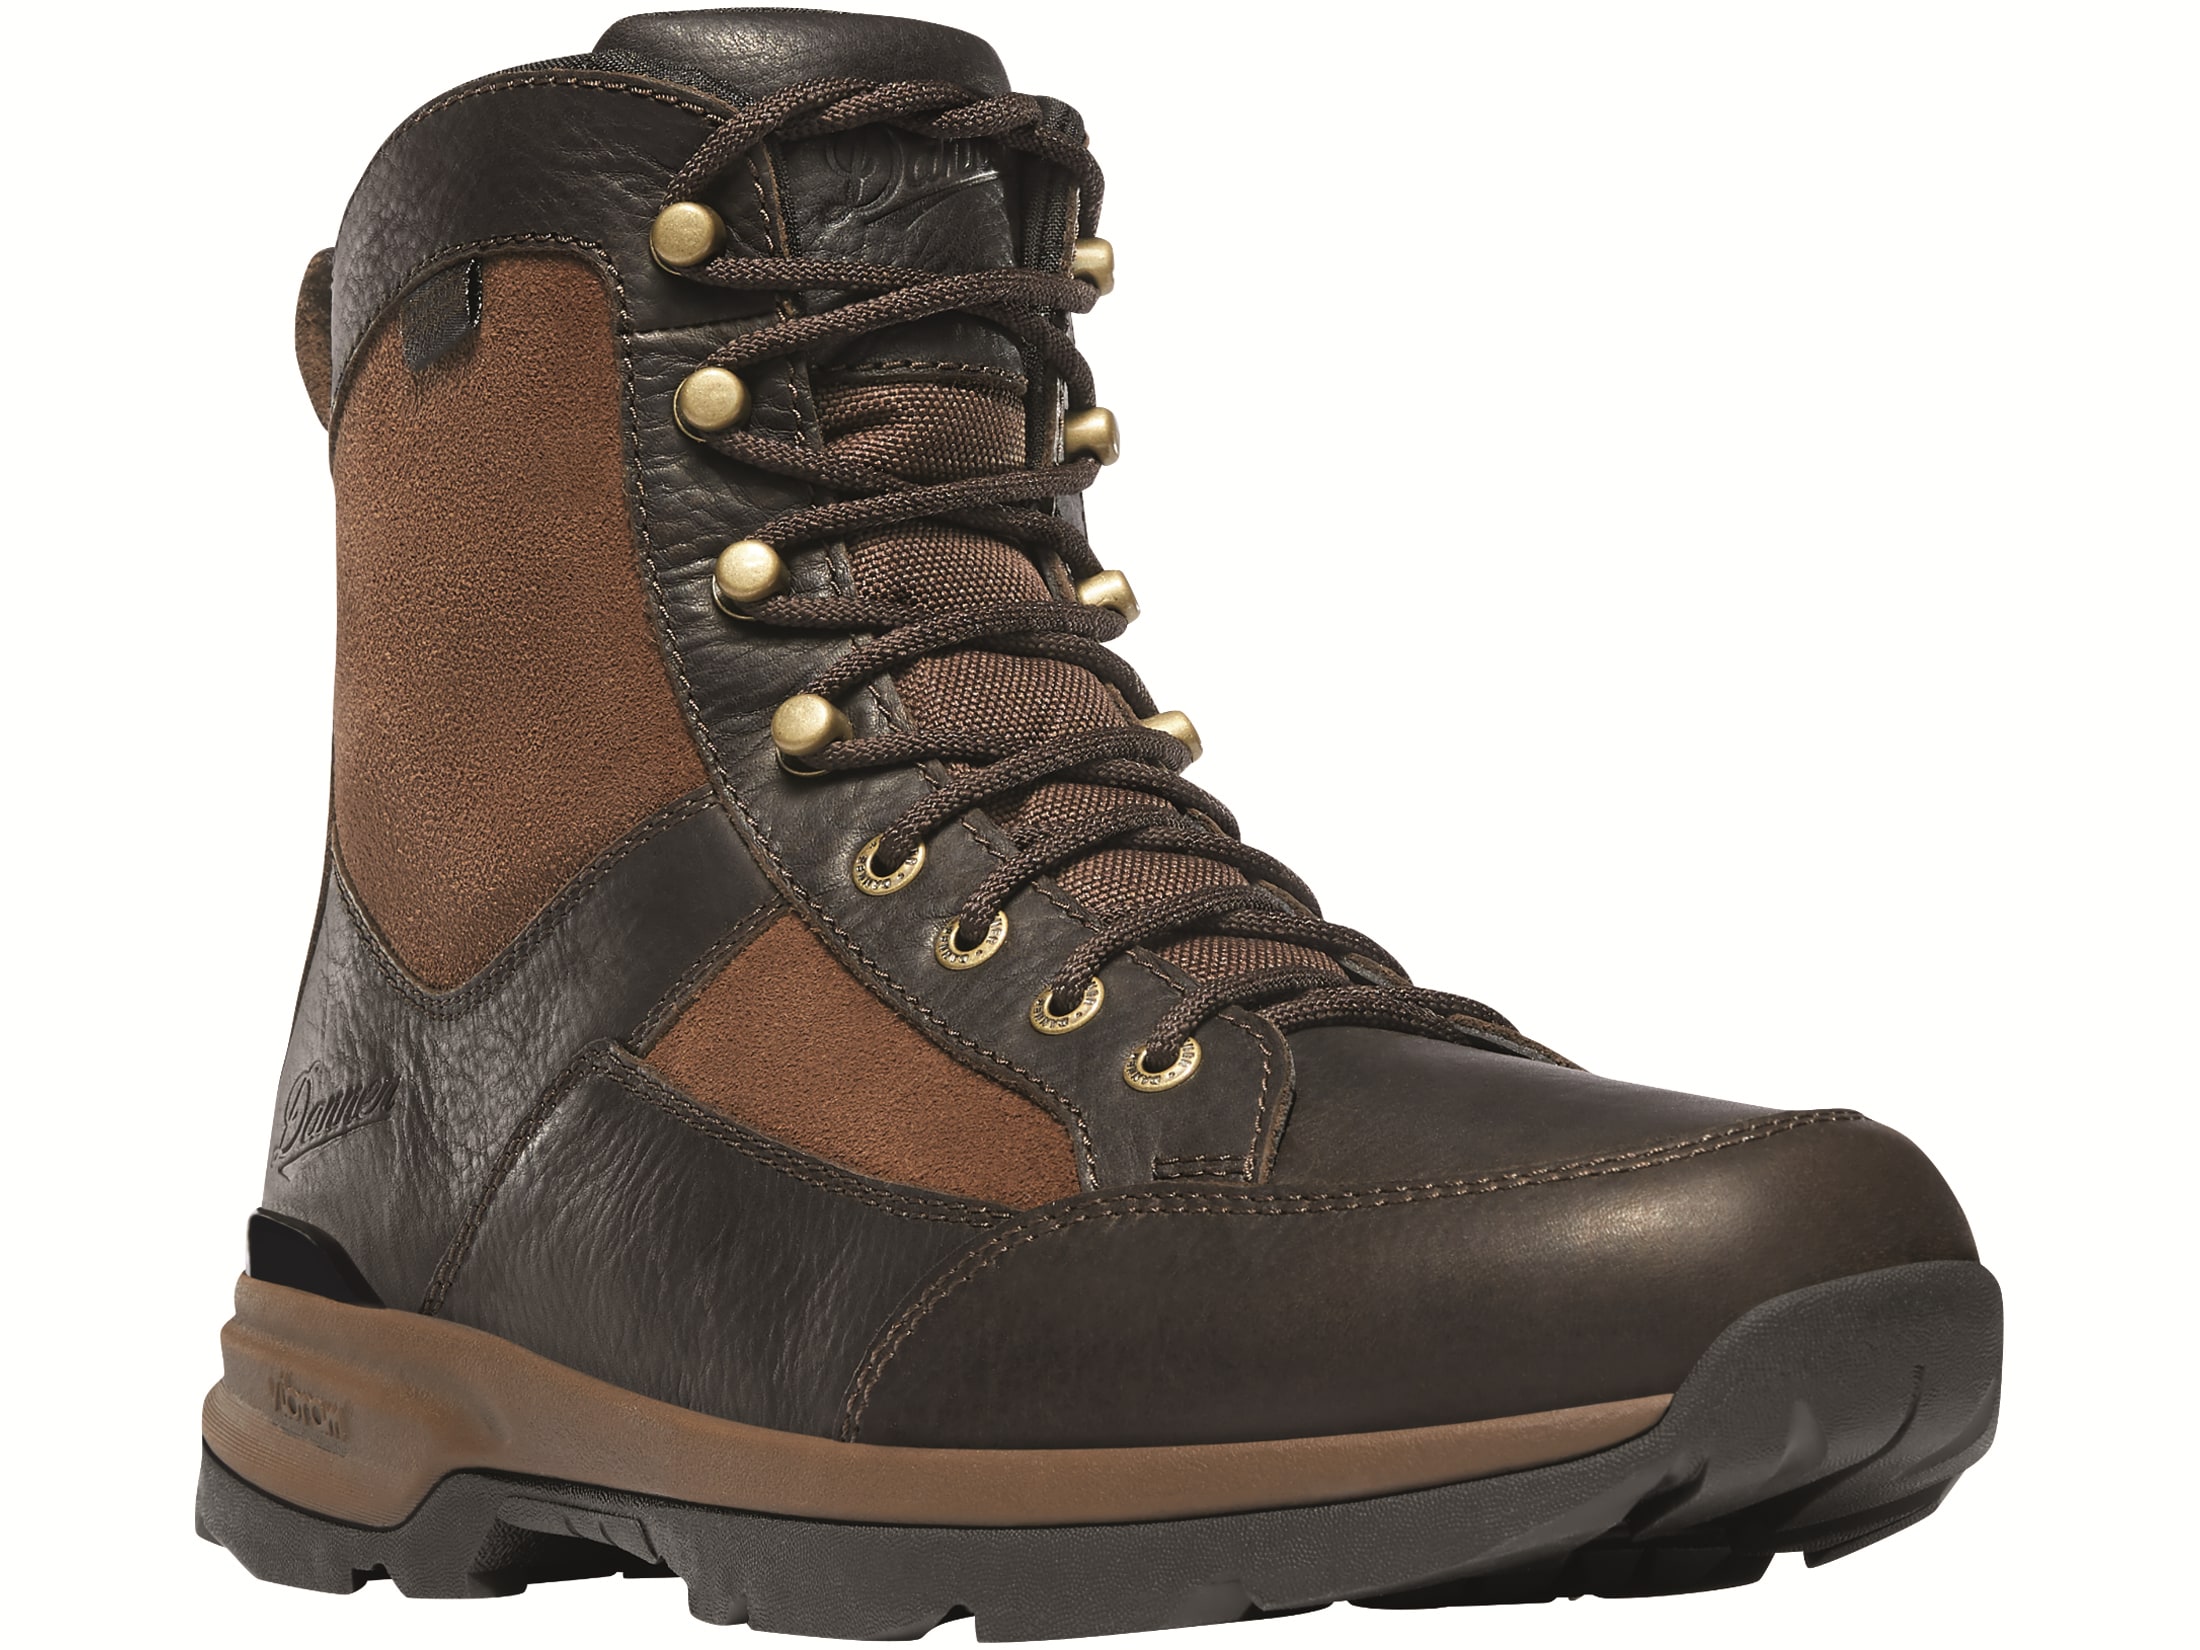 Danner Recurve 7 Waterproof 400 Gram Insulated Hunting Boots